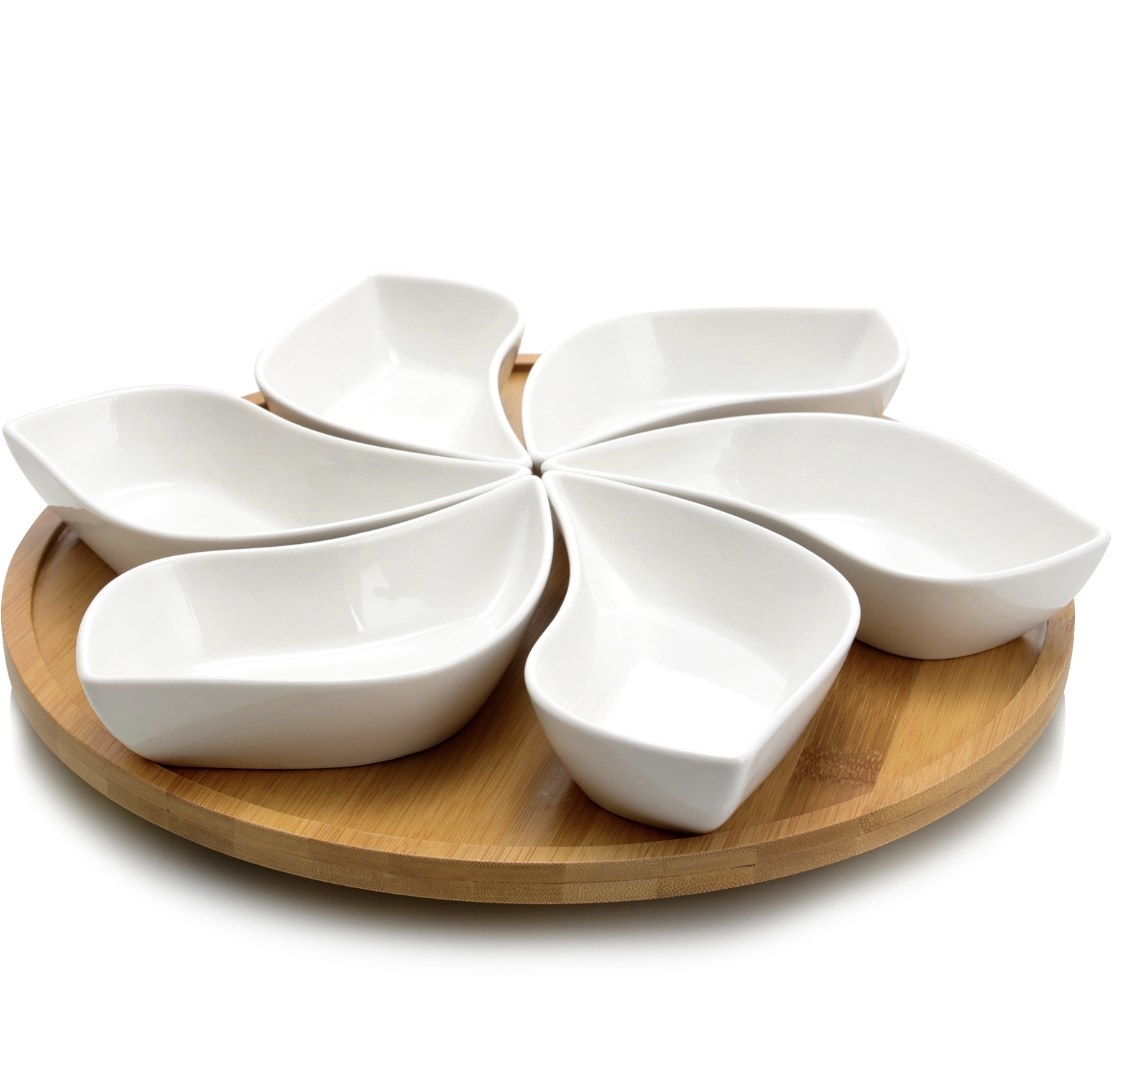 The white stoneware is shaped in a flower and there is a tan rotating tray underneath